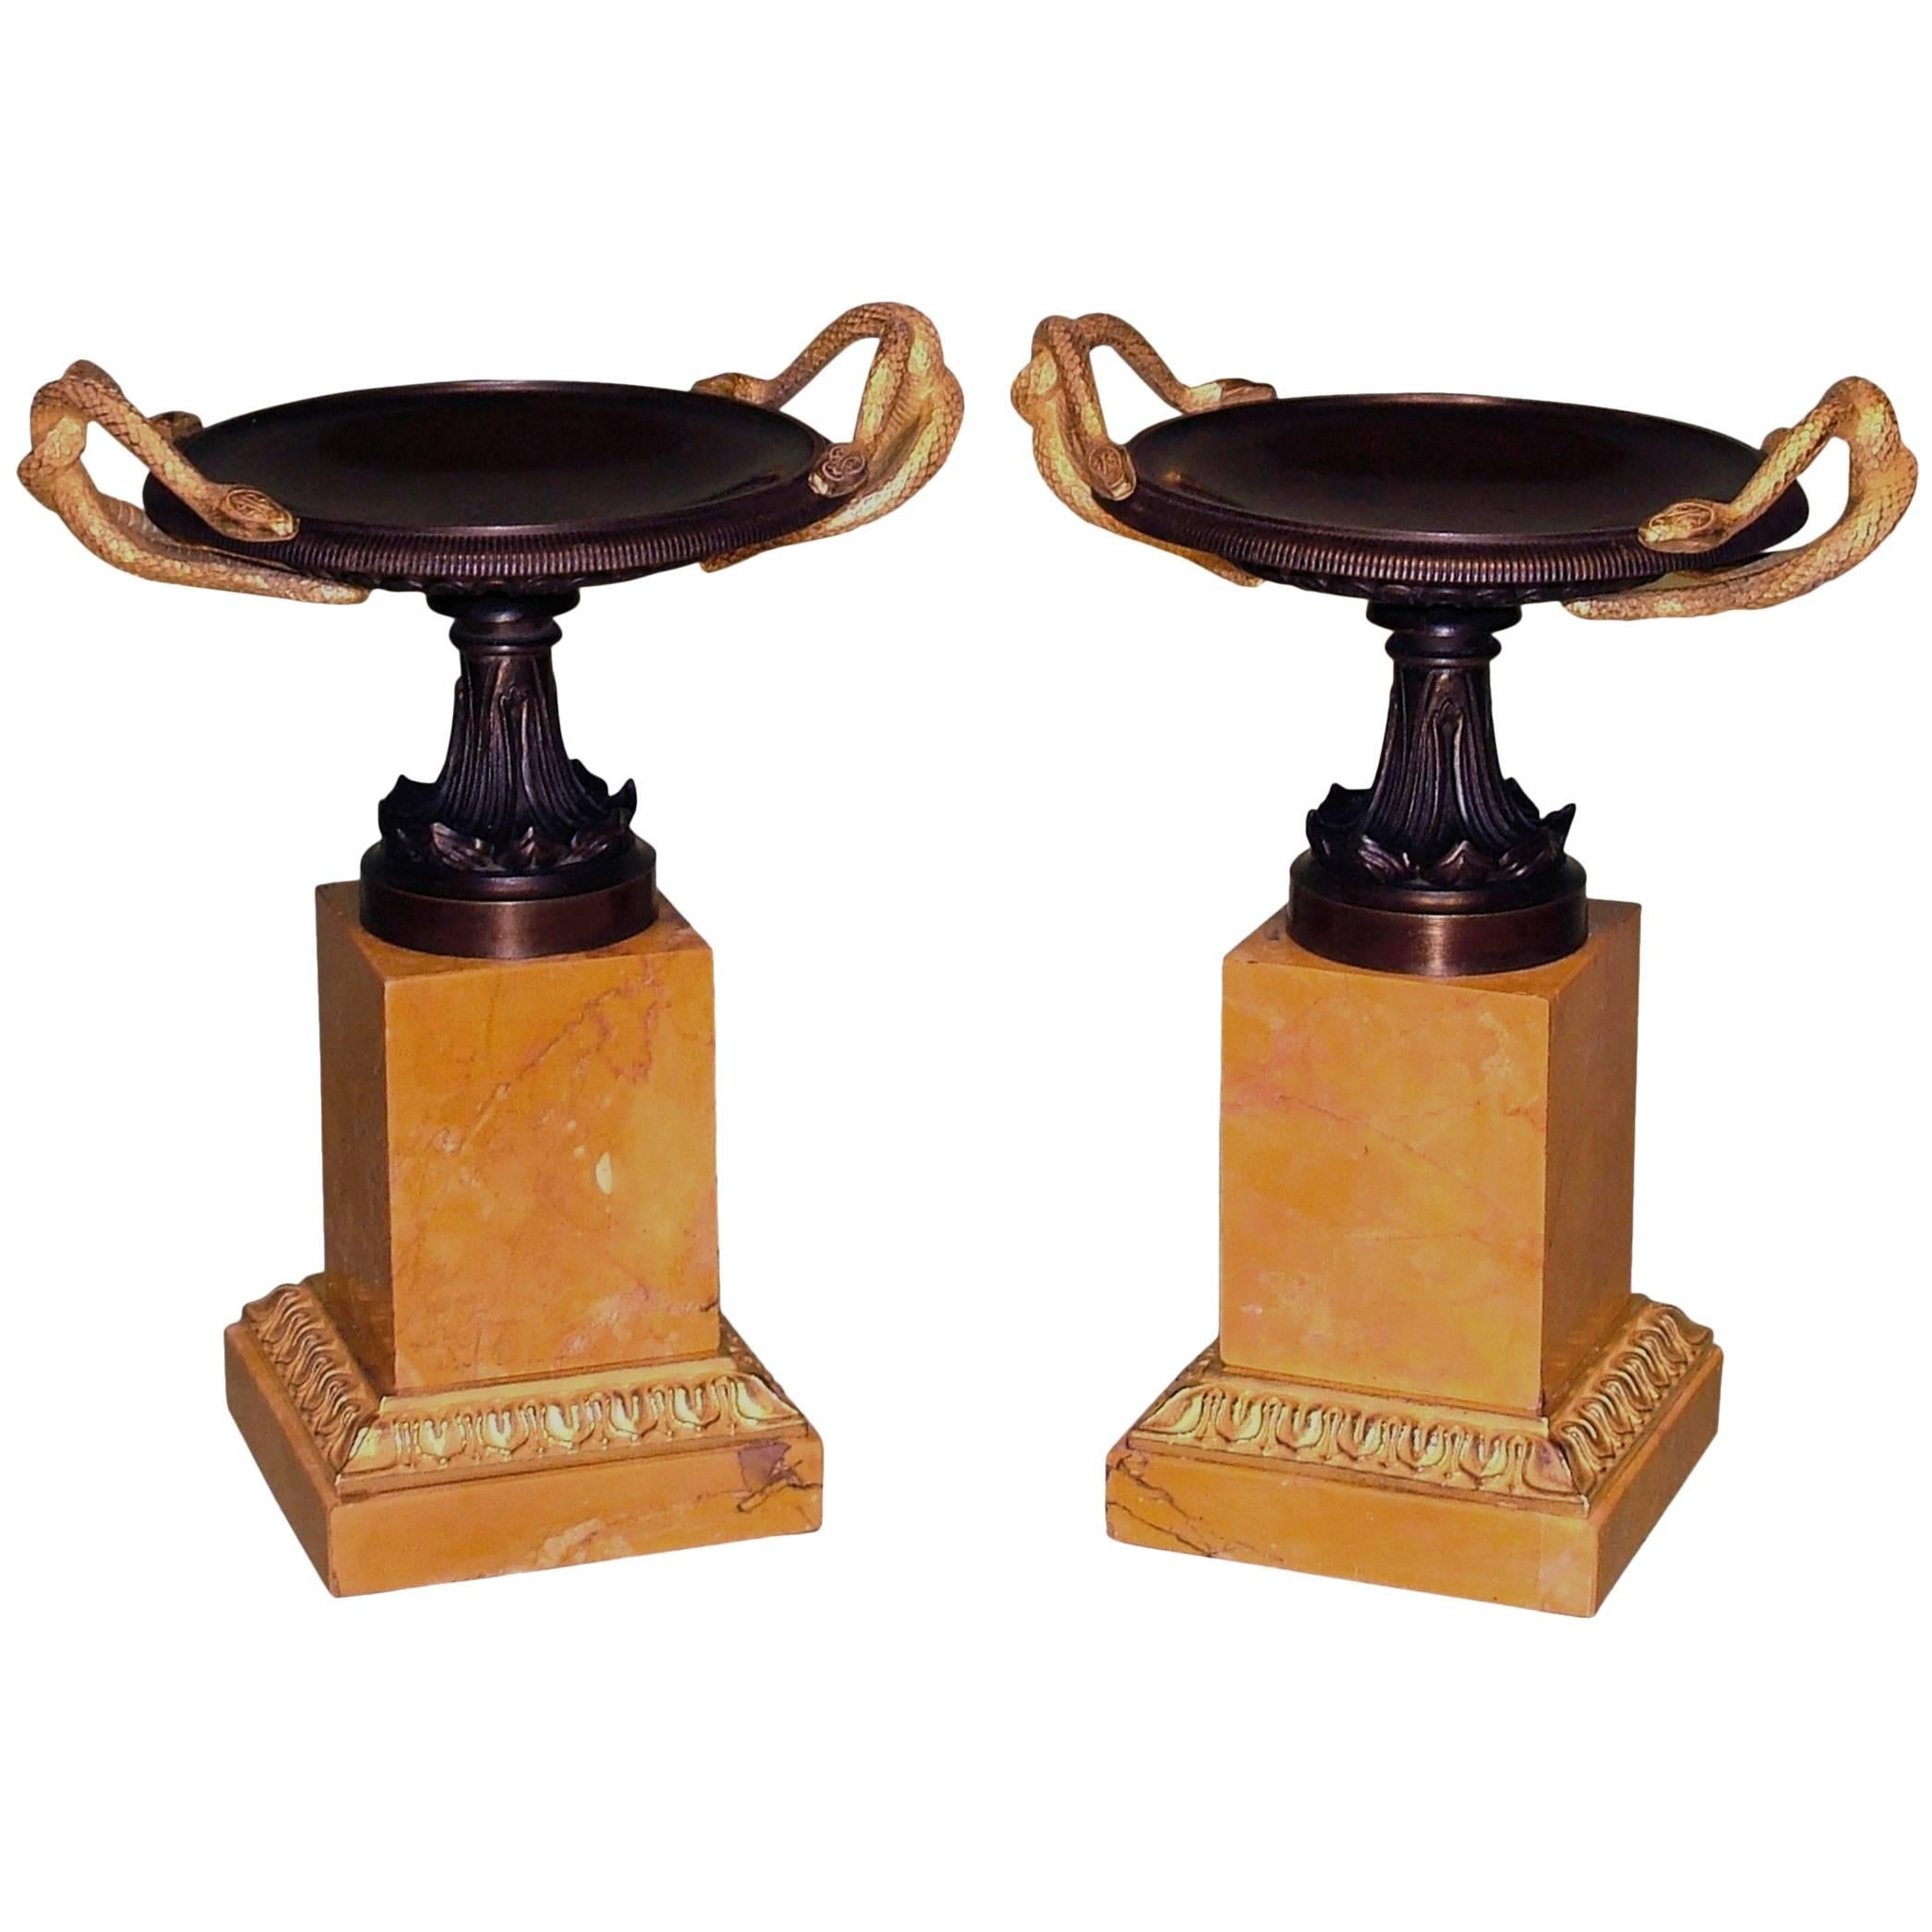 Large Pair of Early 19th Century Bronze and Ormolu Tazzas